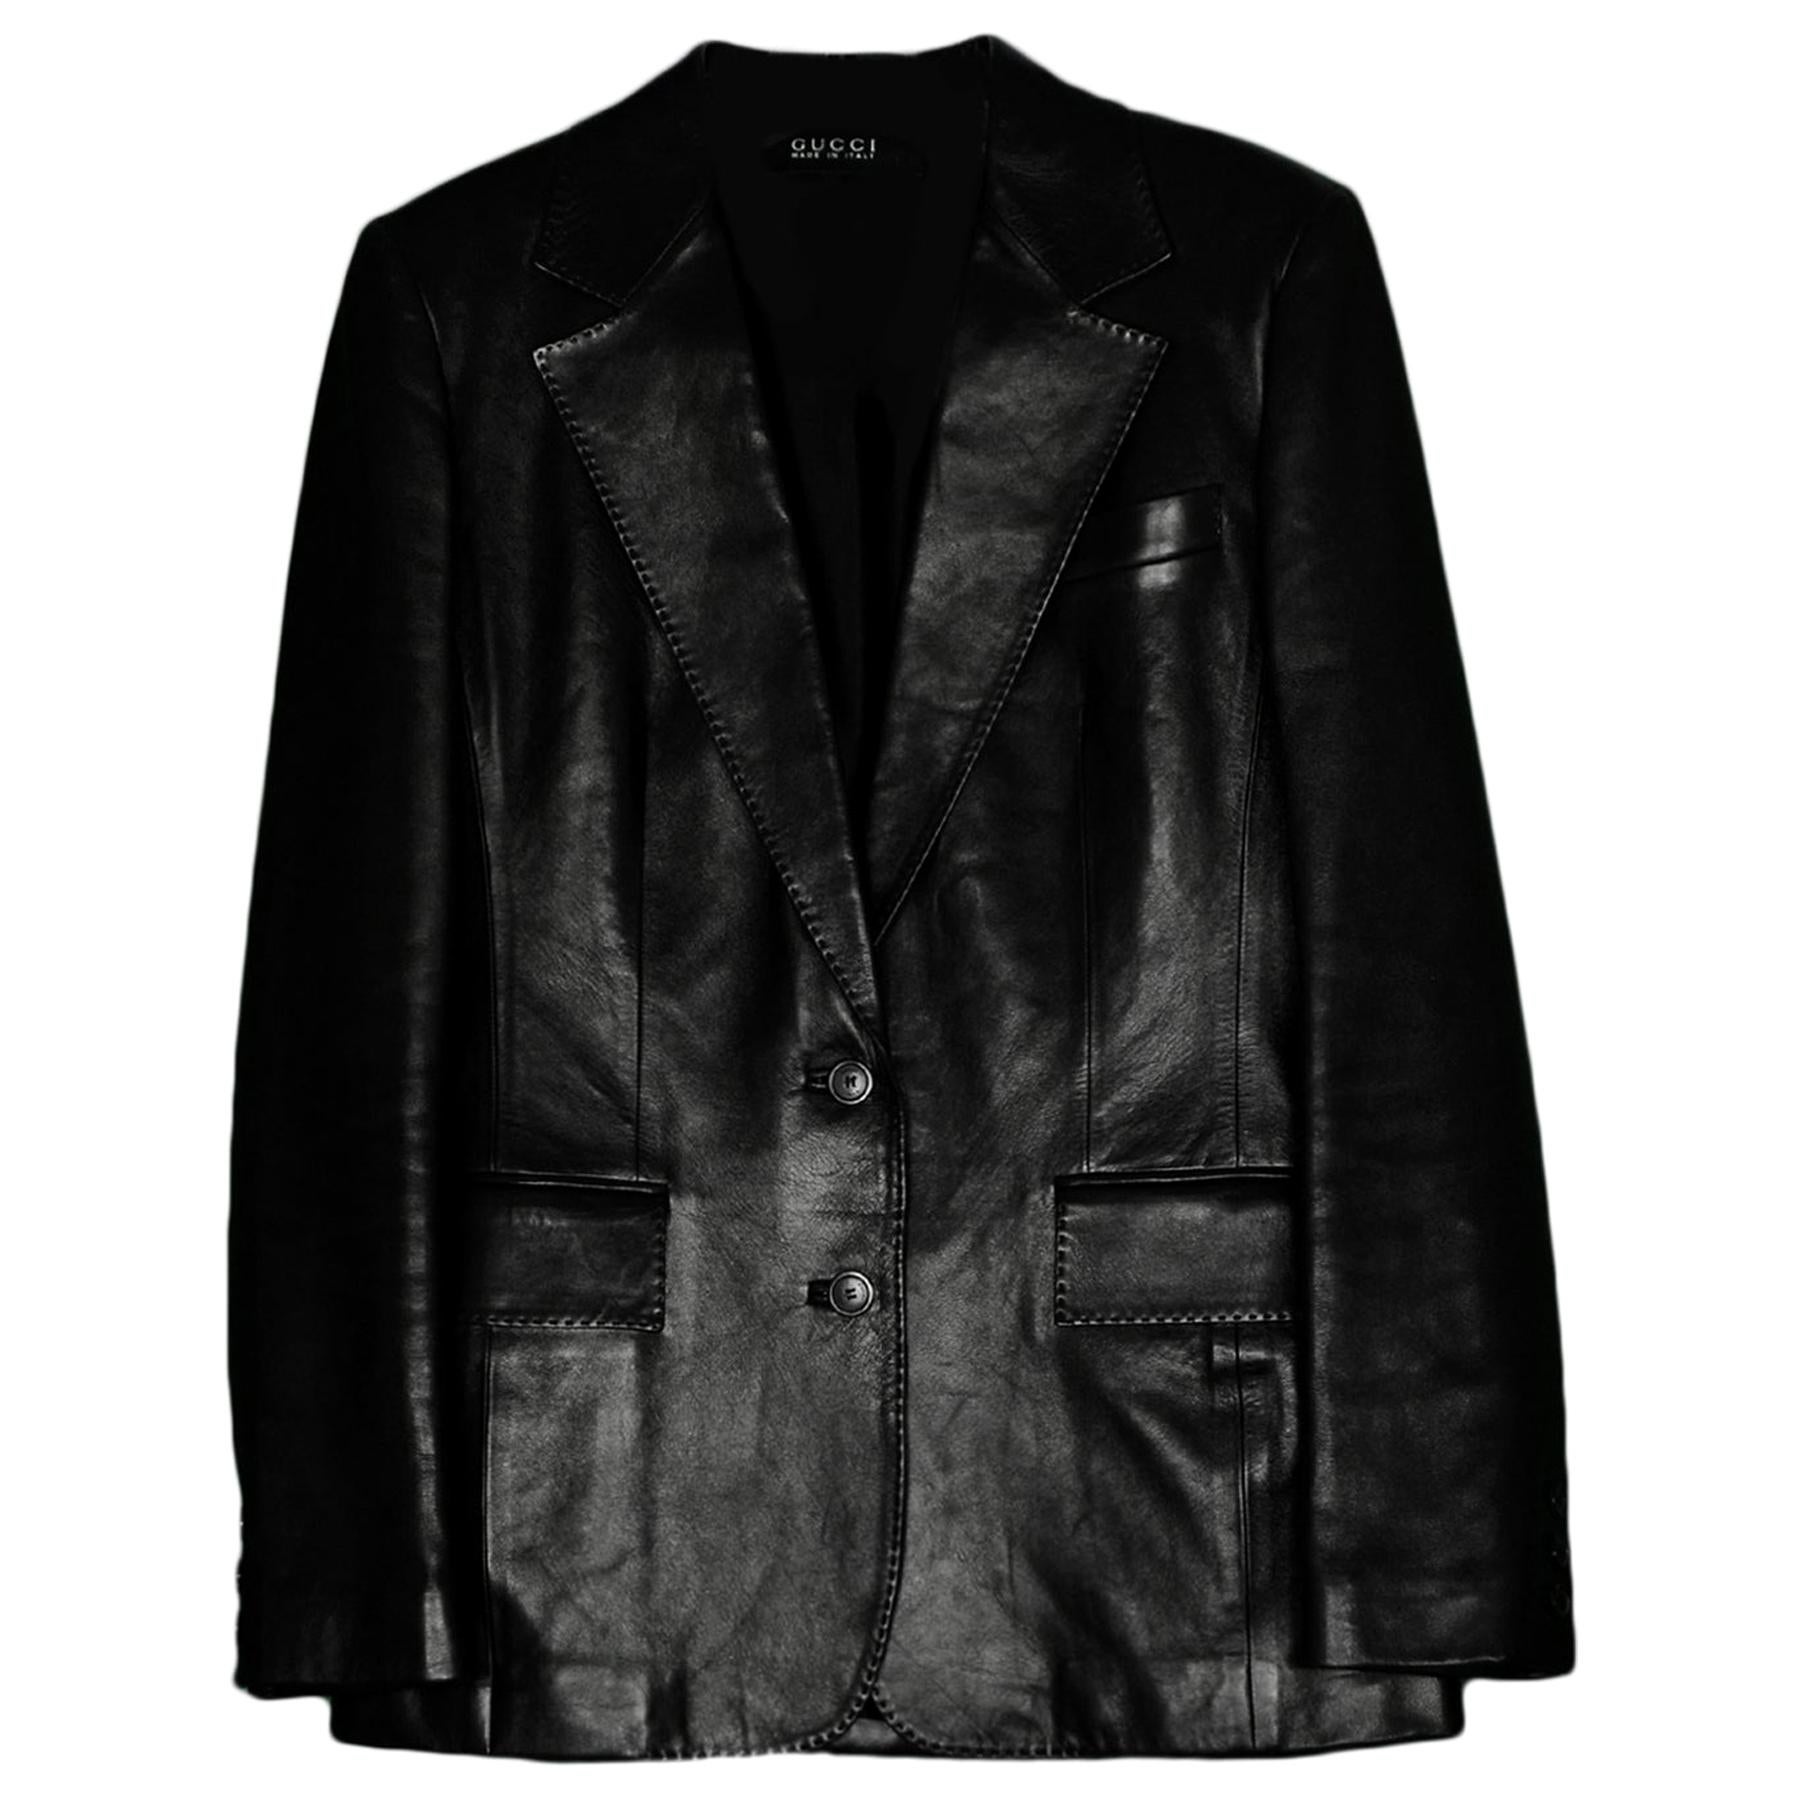 Gucci Black Leather Single Breasted Jacket sz 6